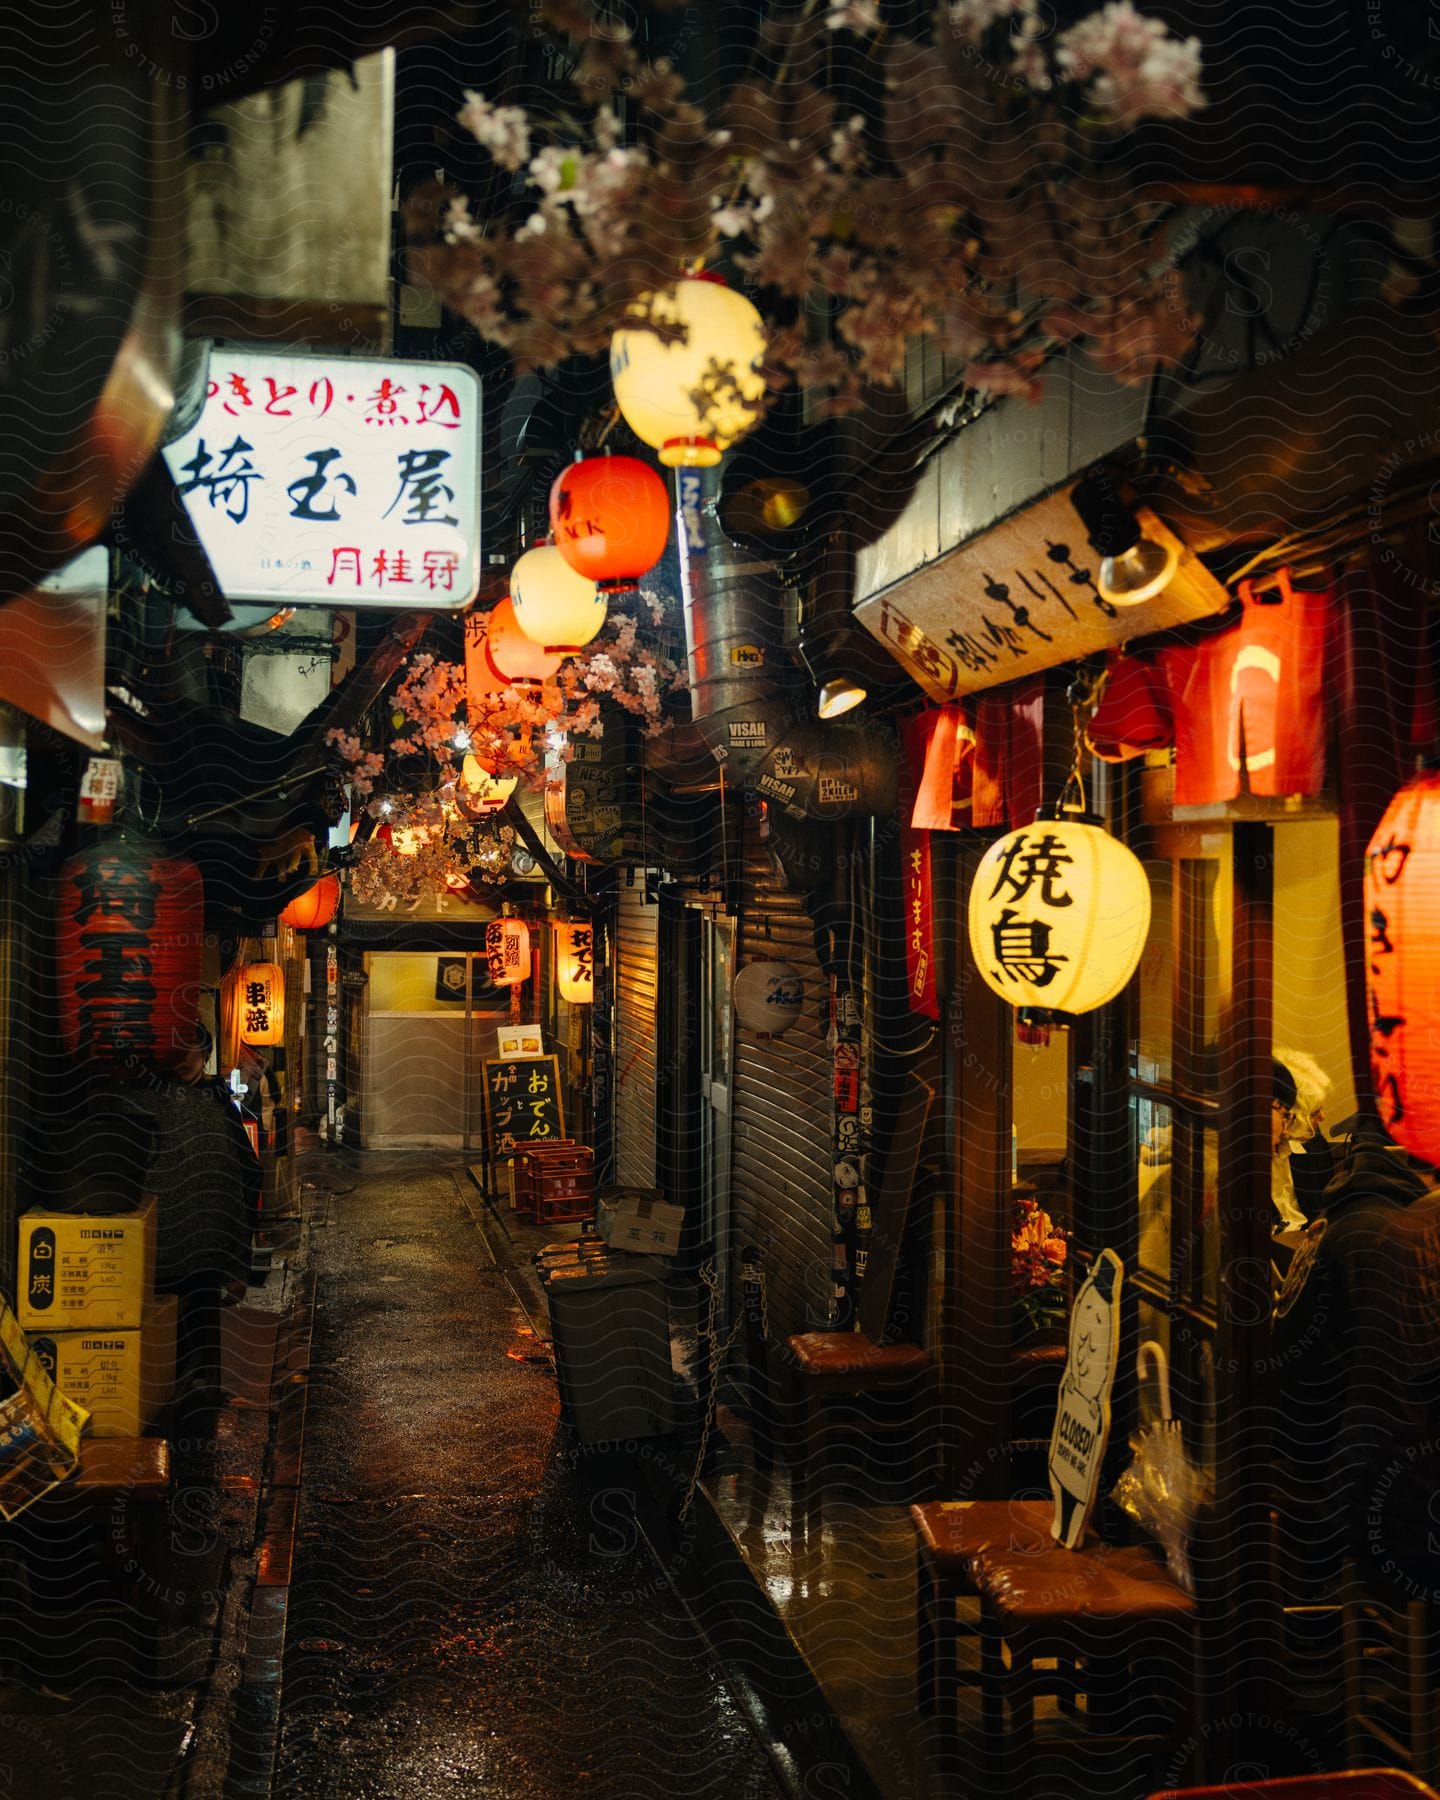 a narrow alleyway lined with small shops and restaurants, with red paper lanterns strung overhead casting a warm glow